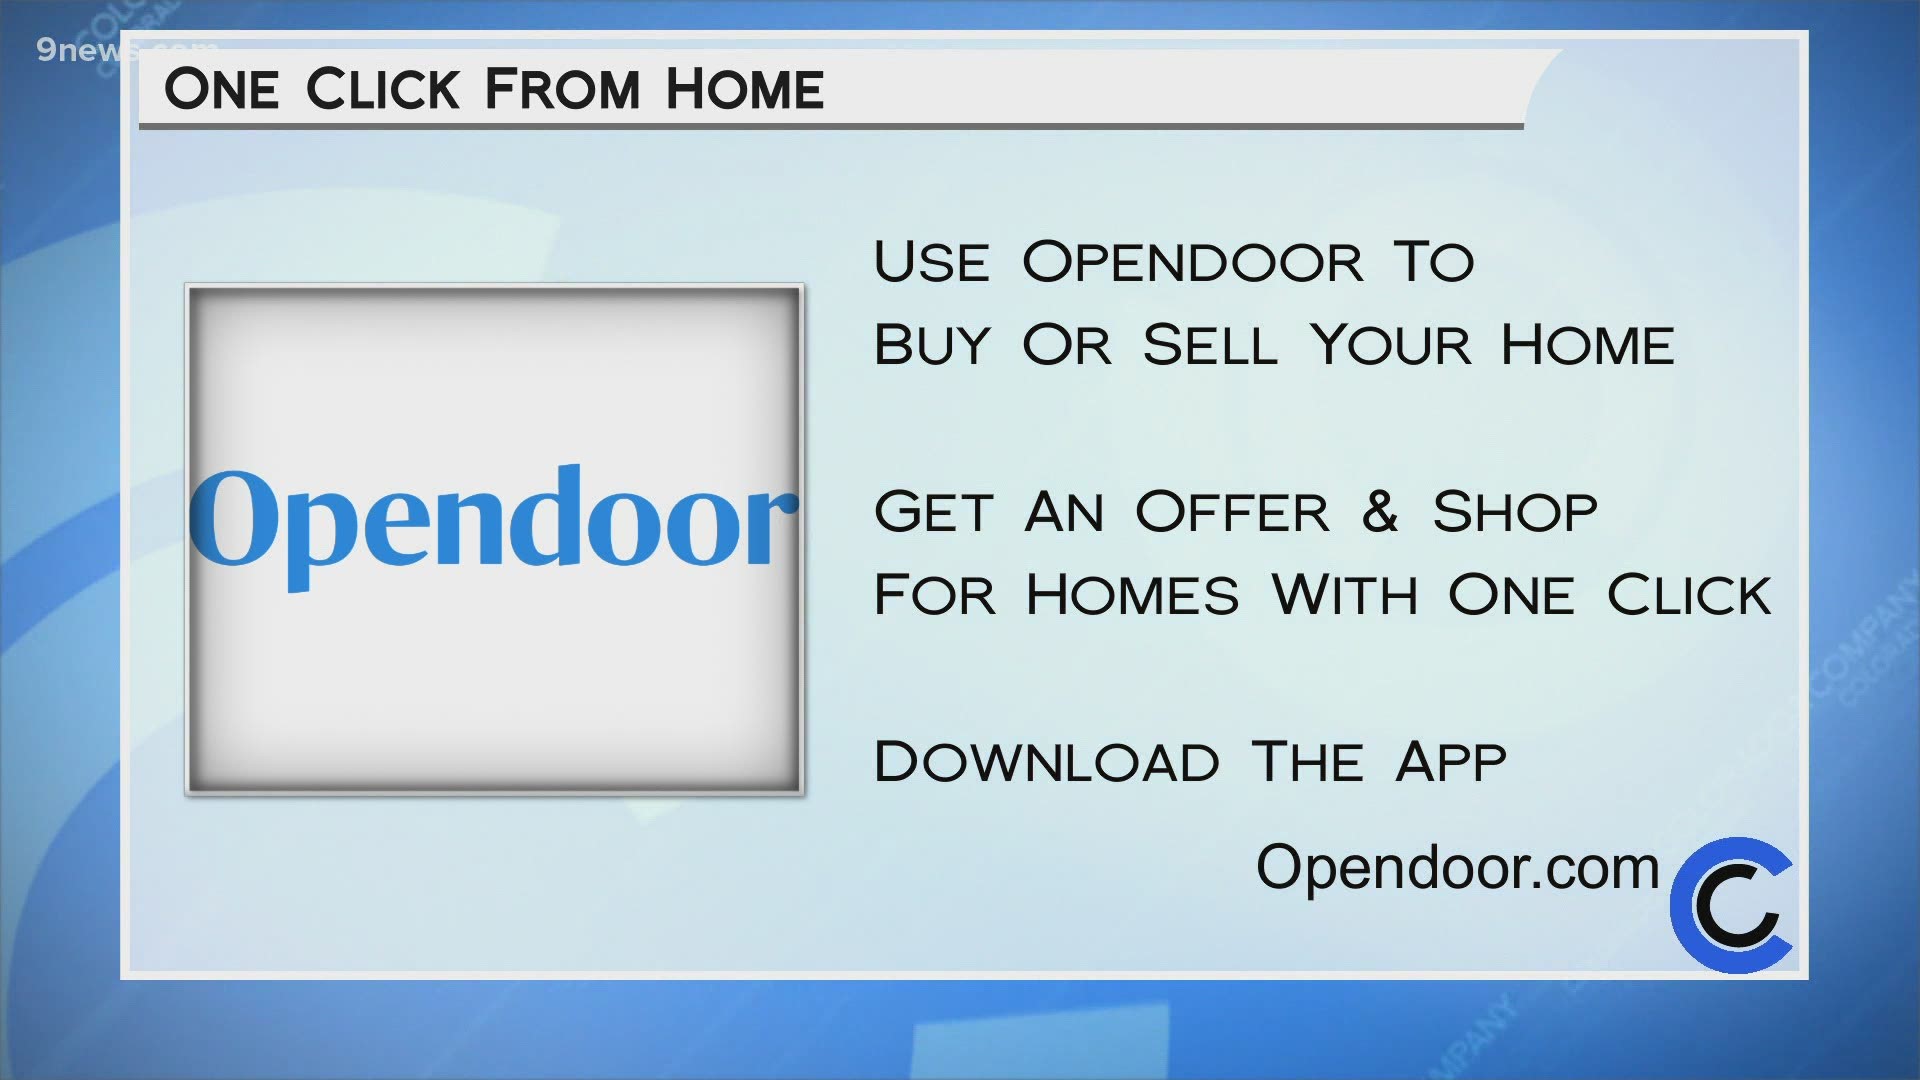 Go to OpenDoor.com to request a no-cost, no-obligation offer. You can tour homes right from your phone! Learn more at OpenDoor.com and download the app.